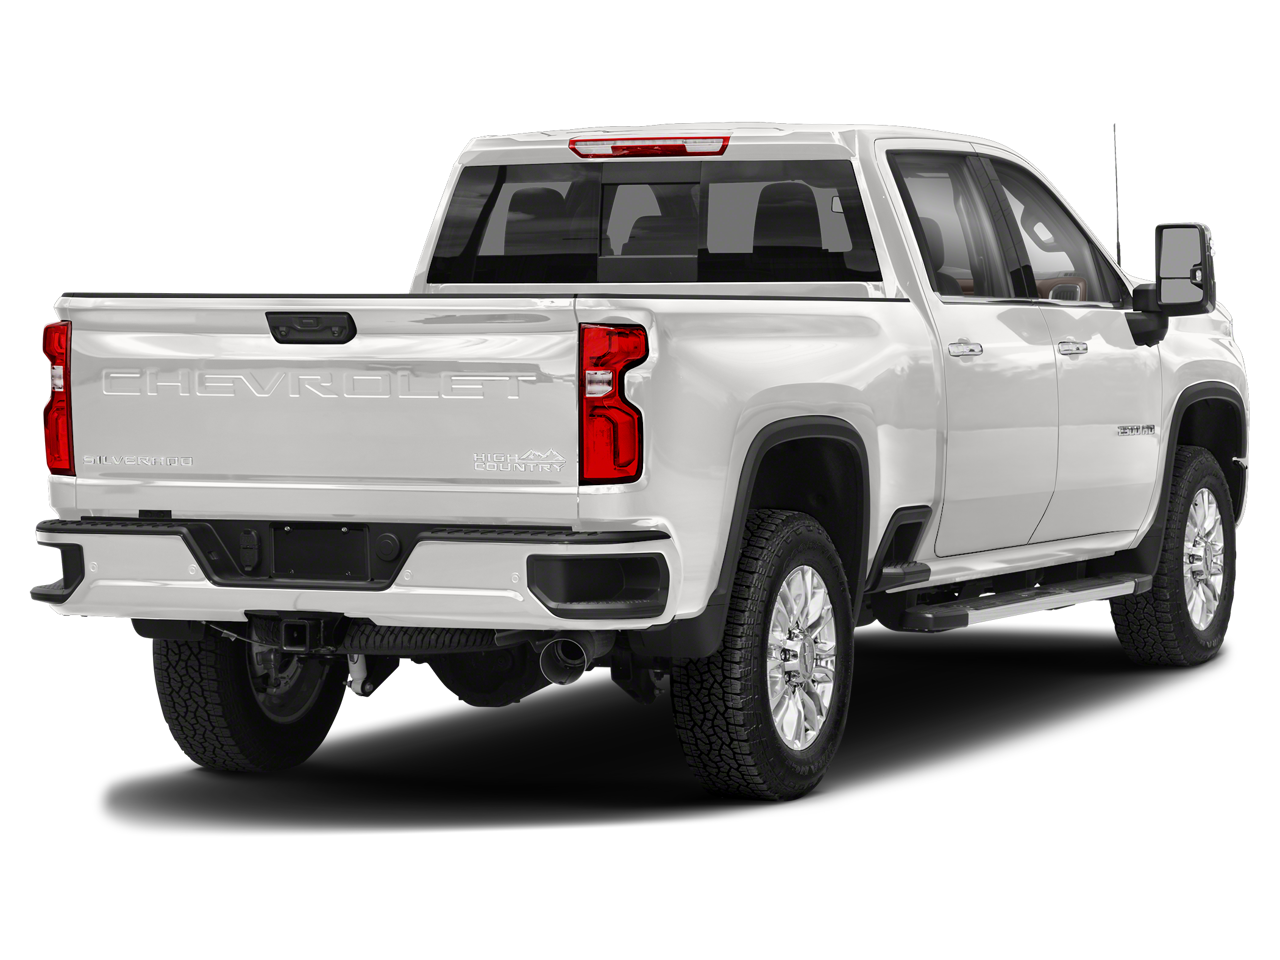 2022 Chevrolet Silverado 2500HD Crew Cab High Country Z71 4WD 6.6L V8 Diesel Bedliner Heated Cooled Leather Nav 20 Inch Wheels